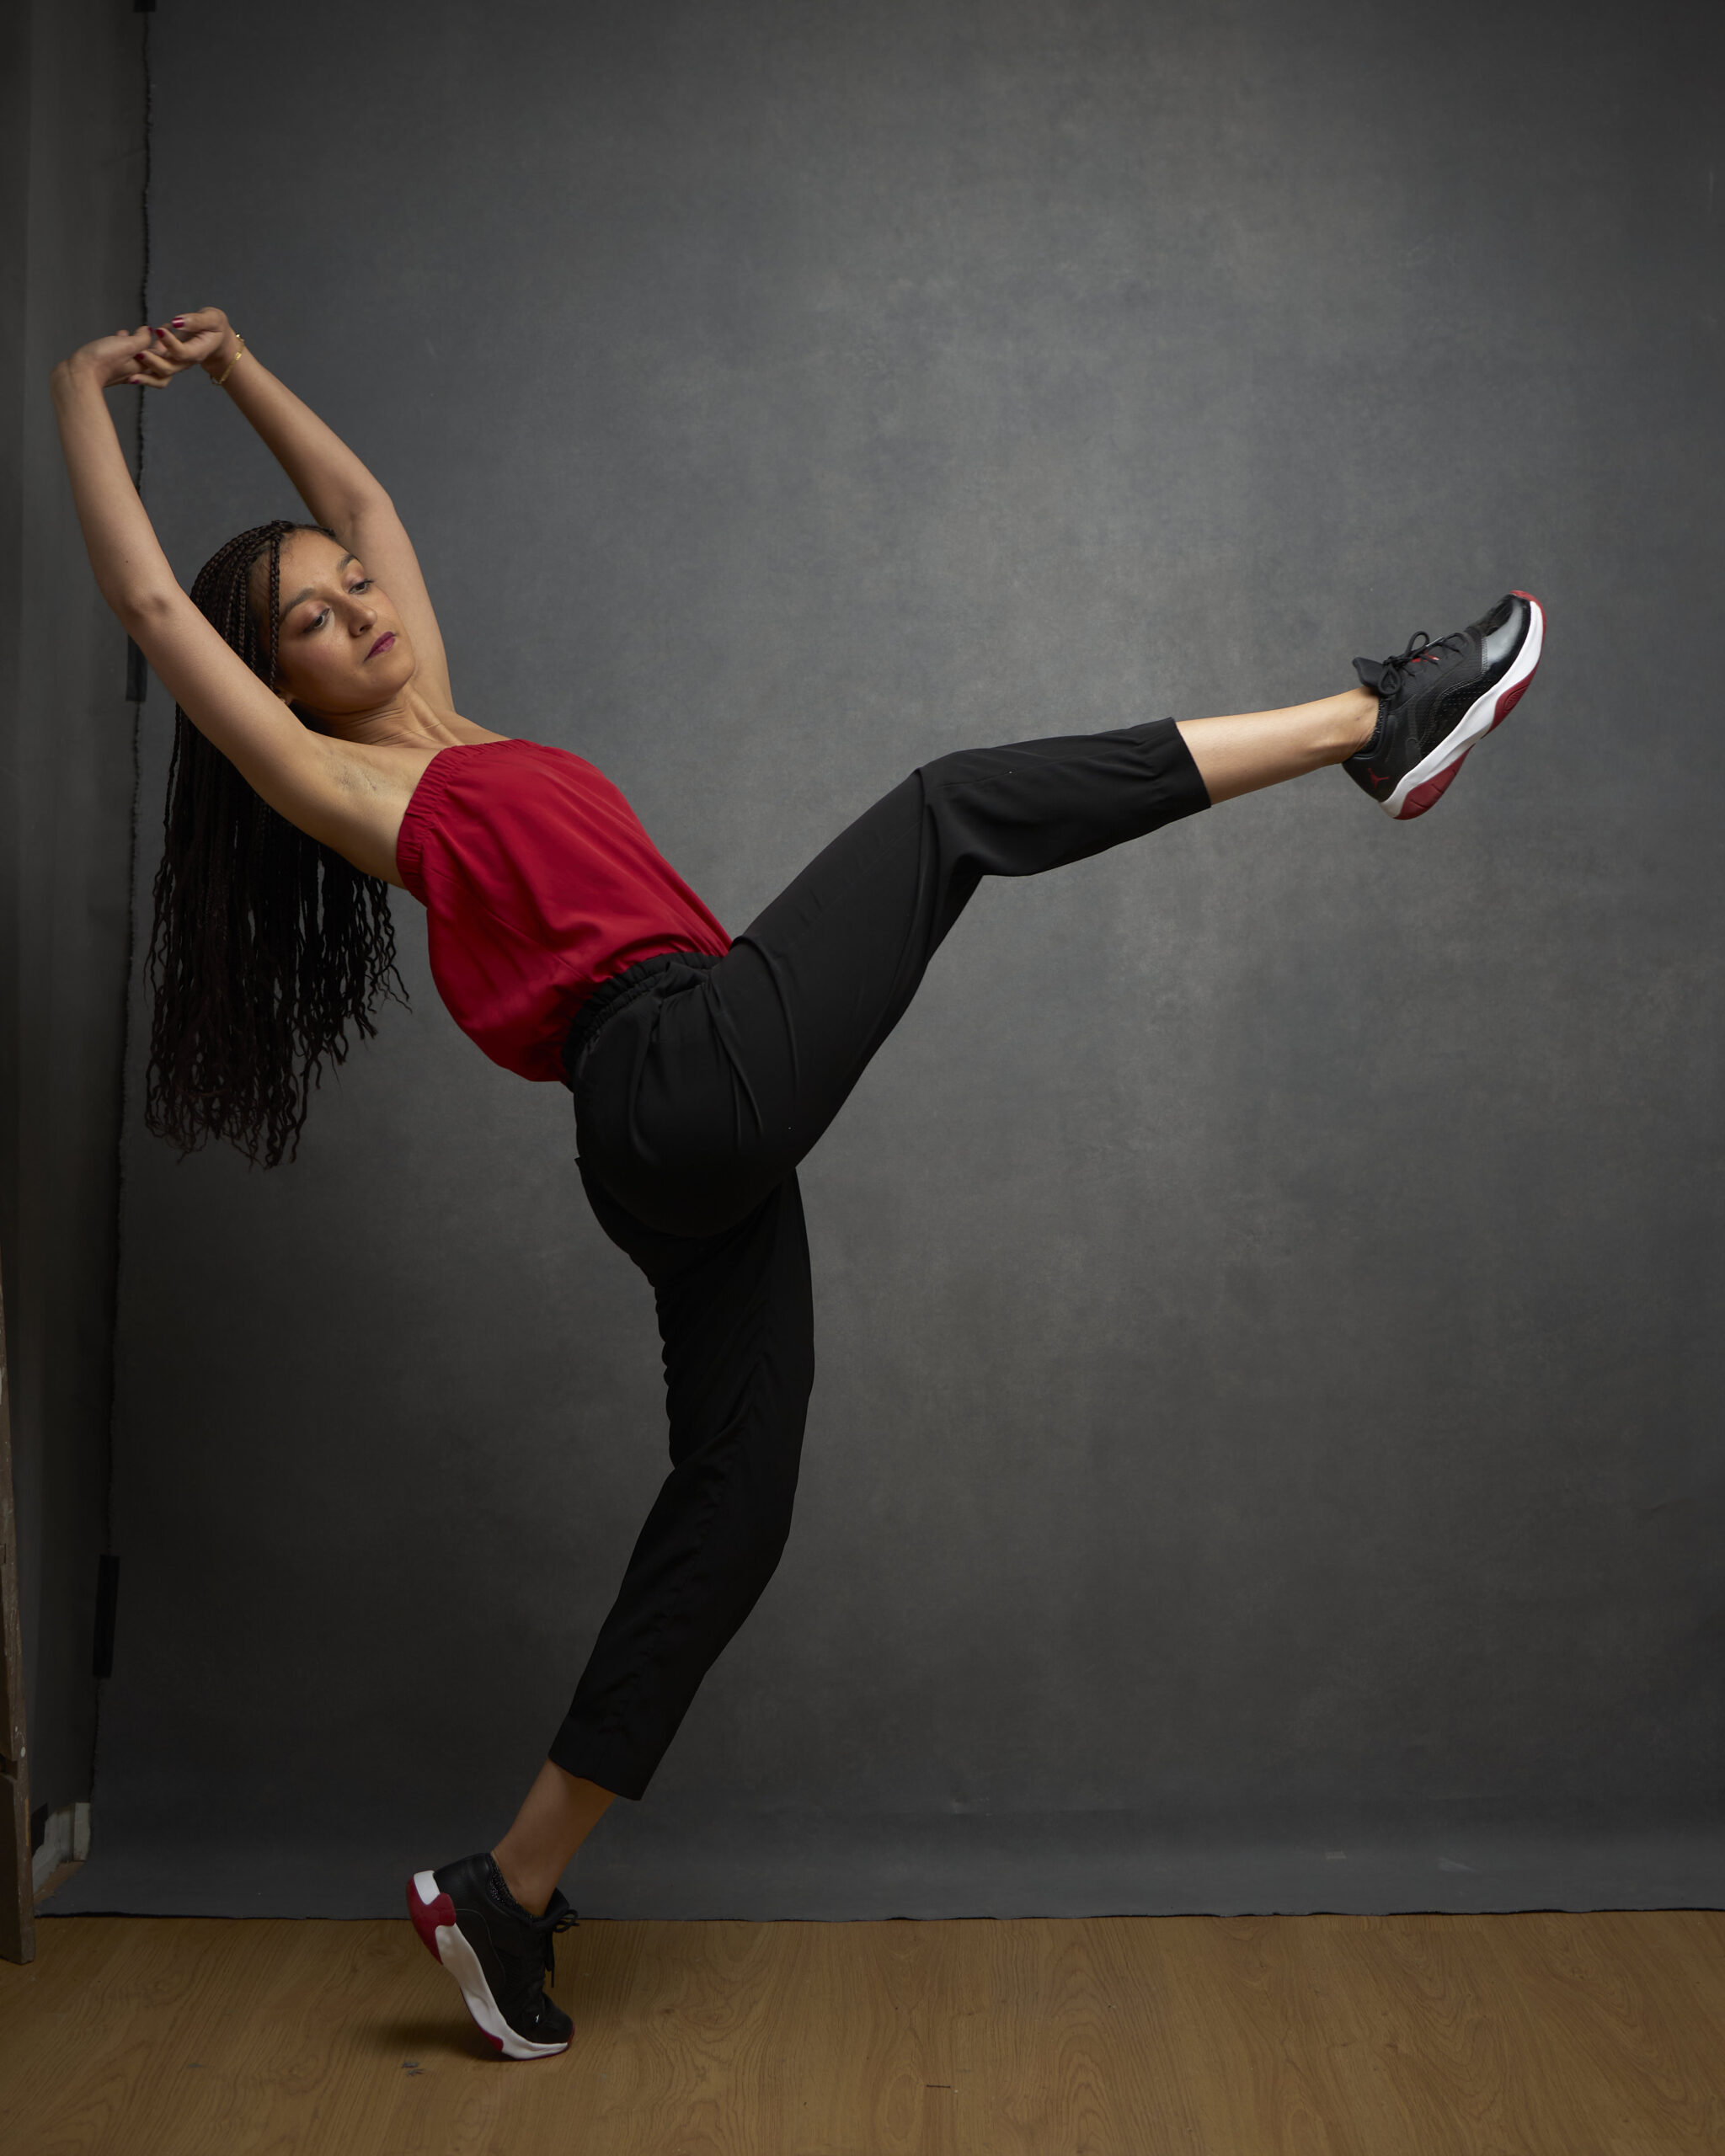 A woman is doing a dance move in front of a wall.